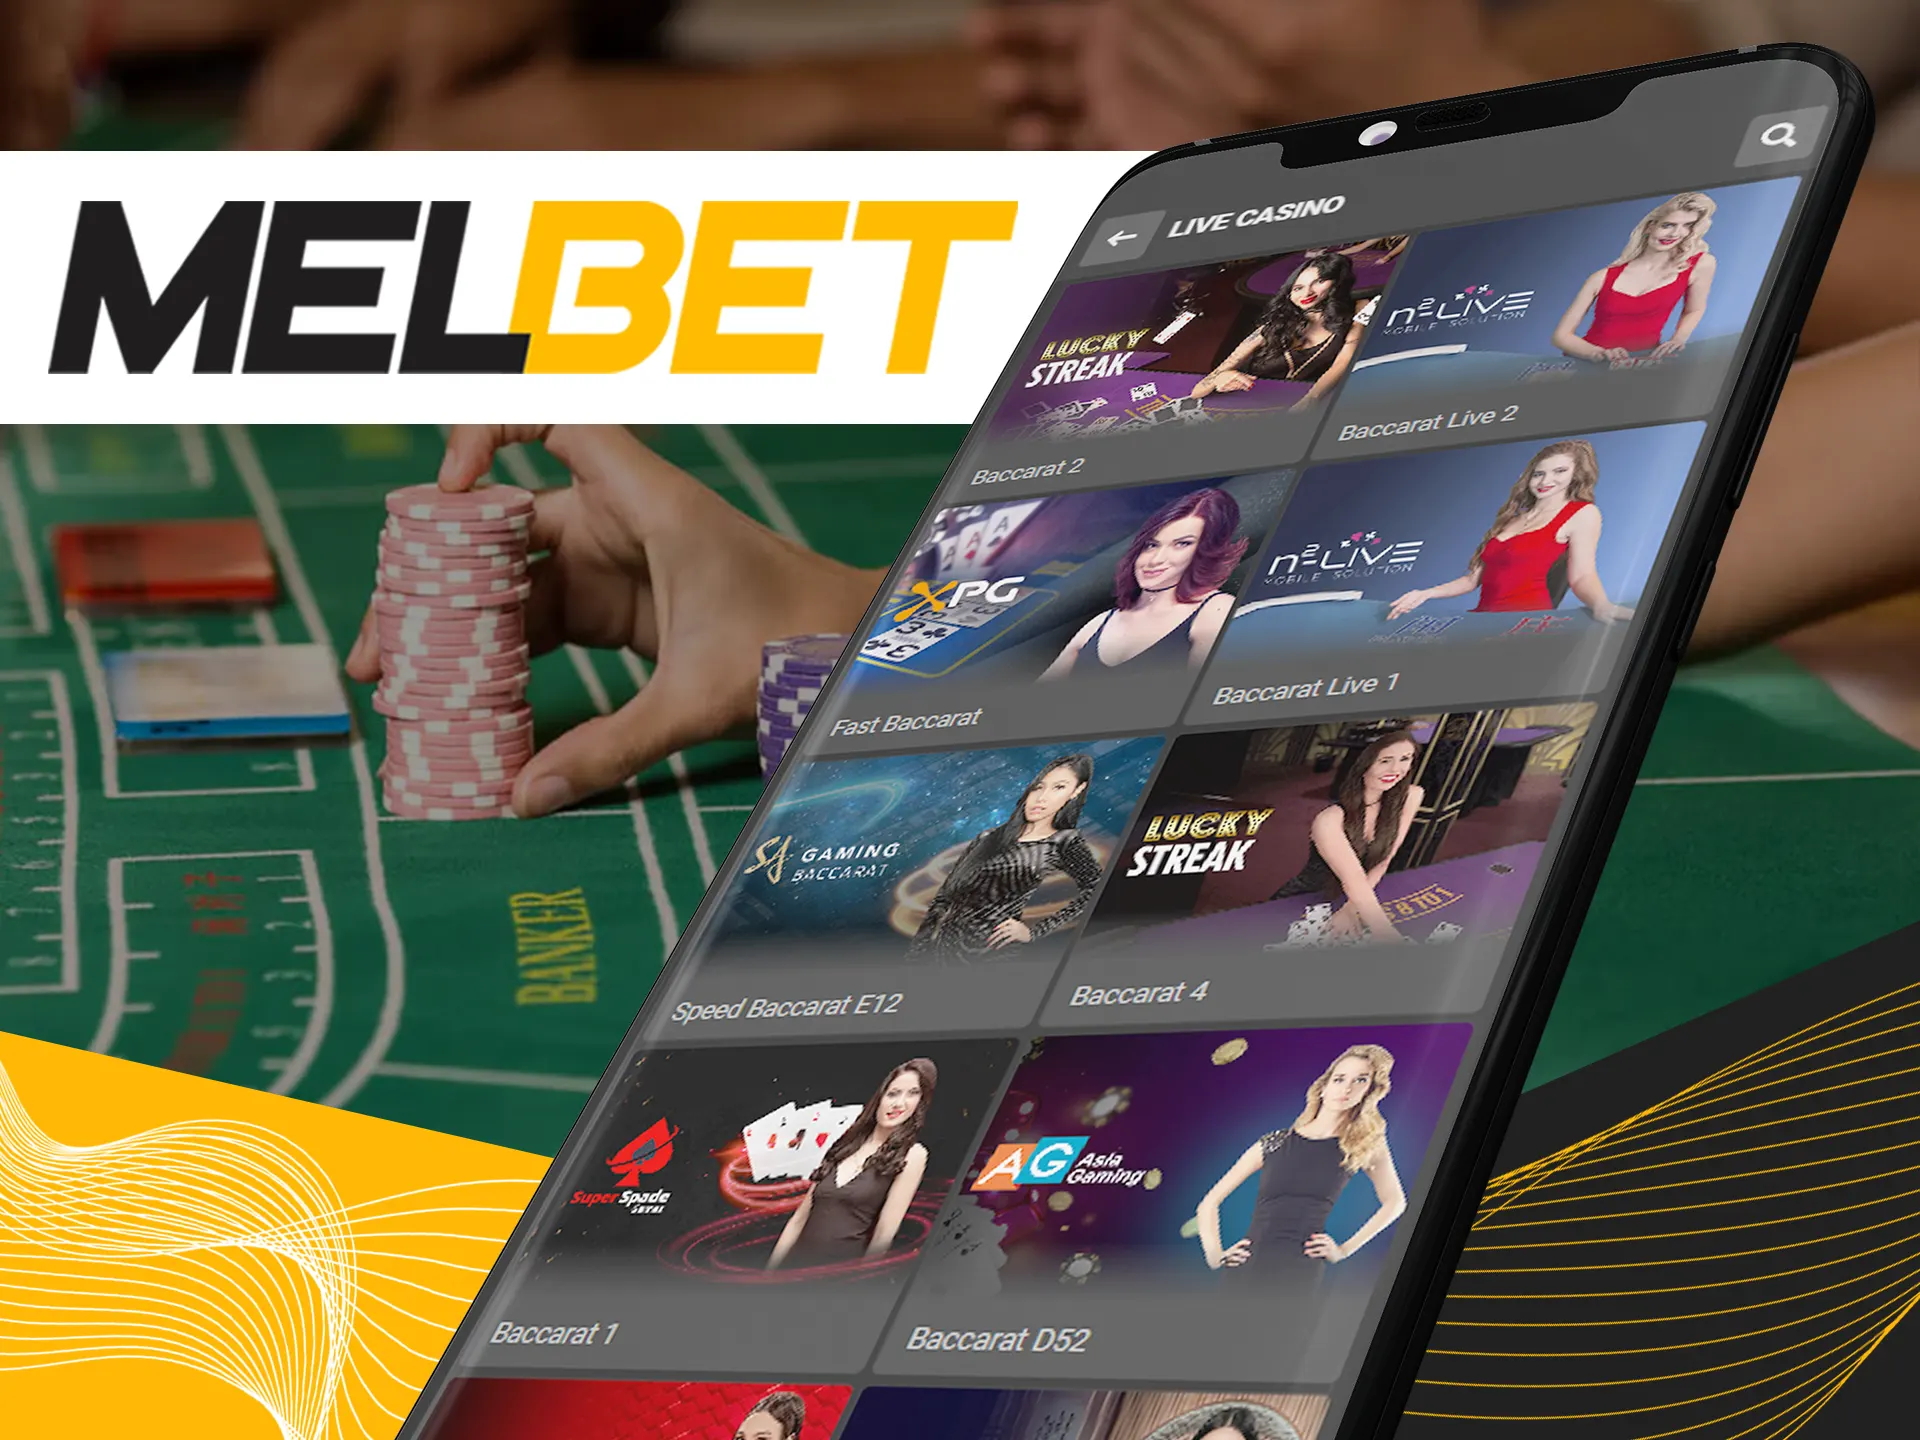 Play baccarat games at Melbet casino and win money.